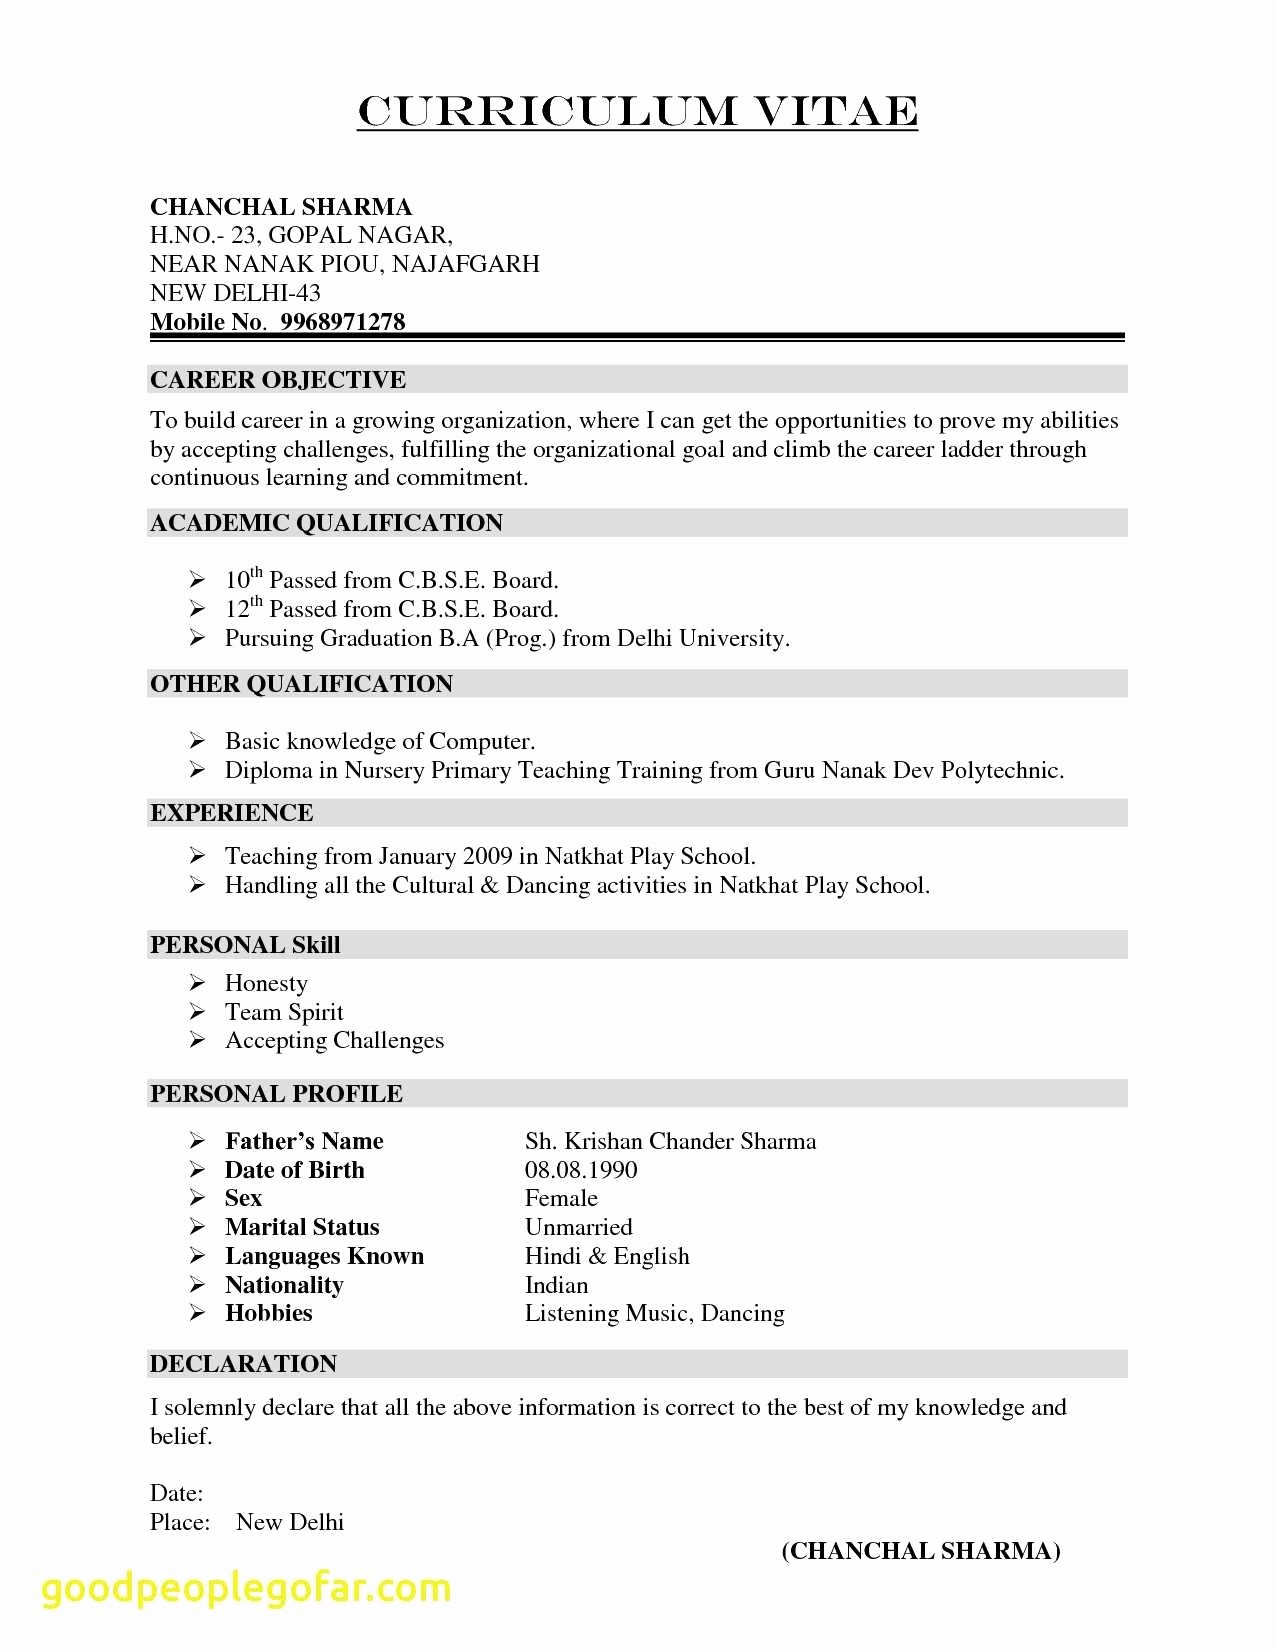 Free Resume Cover Letter Template New Cover Letter for Resume Template Free 2018 Professional